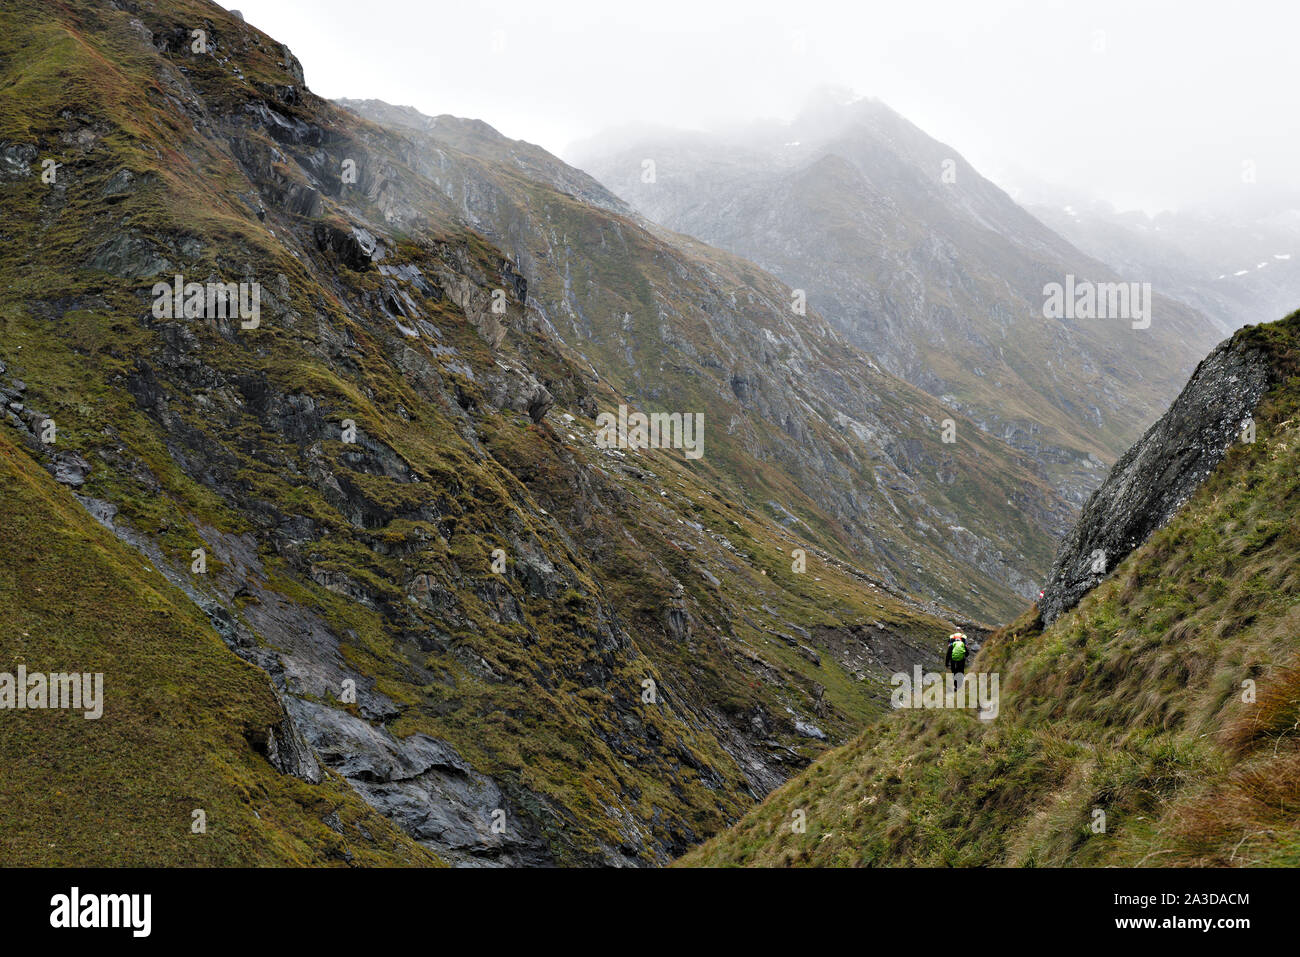 Hikers in Umbaltal/Virgental on a rainy day in the Hohe Tauern National Park in Austria Stock Photo